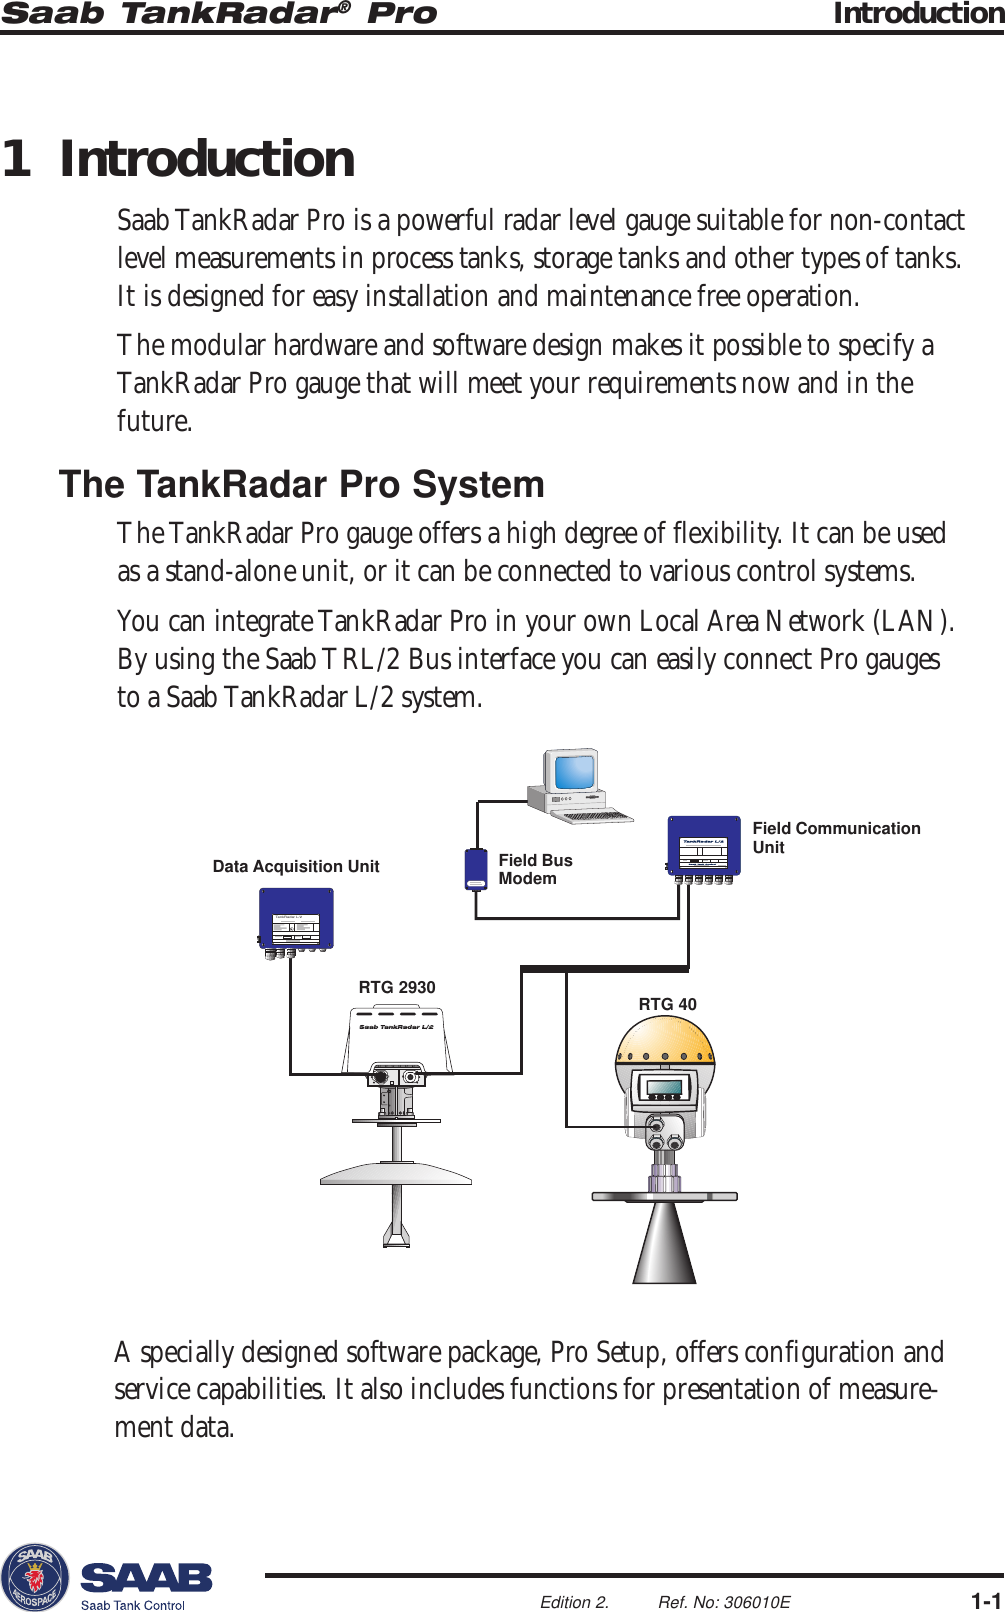 Saab TankRadar® Pro Introduction1-1Edition 2. Ref. No: 306010E1 IntroductionSaab TankRadar Pro is a powerful radar level gauge suitable for non-contactlevel measurements in process tanks, storage tanks and other types of tanks.It is designed for easy installation and maintenance free operation.The modular hardware and software design makes it possible to specify aTankRadar Pro gauge that will meet your requirements now and in thefuture.The TankRadar Pro SystemThe TankRadar Pro gauge offers a high degree of flexibility. It can be usedas a stand-alone unit, or it can be connected to various control systems.You can integrate TankRadar Pro in your own Local Area Network (LAN).By using the Saab TRL/2 Bus interface you can easily connect Pro gaugesto a Saab TankRadar L/2 system.A specially designed software package, Pro Setup, offers configuration andservice capabilities. It also includes functions for presentation of measure-ment data.TankRadar L/2Data Acquisition UnitField CommunicationUnitRTG 40RTG 2930Field BusModem